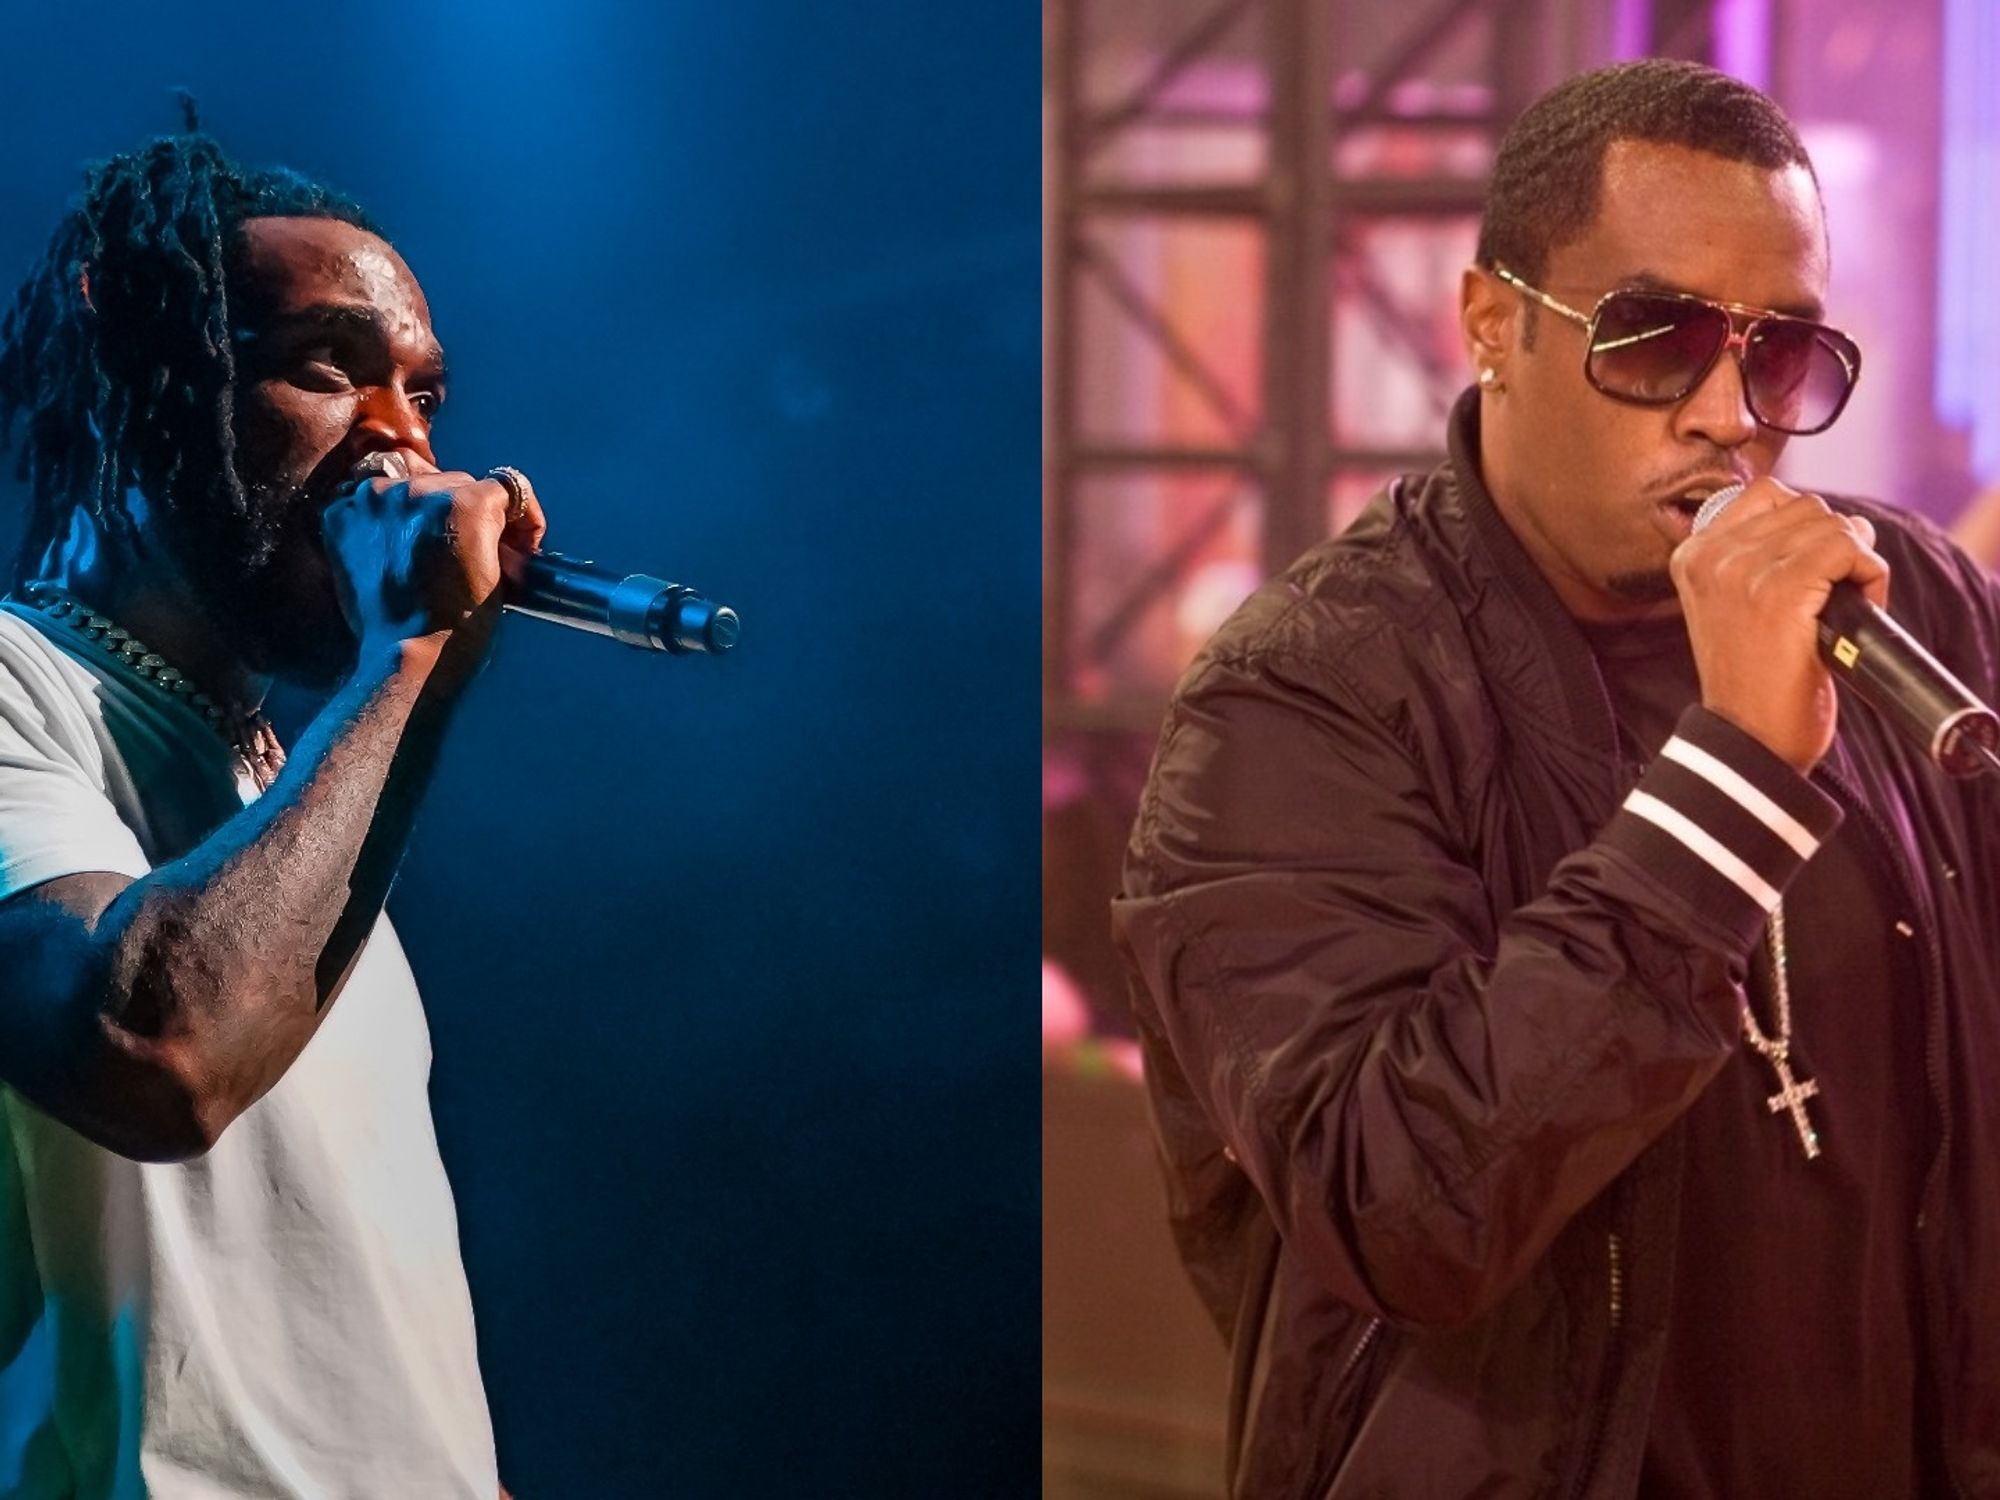 These Clips of Burna Boy and Diddy Dancing Together on IG Live Will Brighten Your Mood